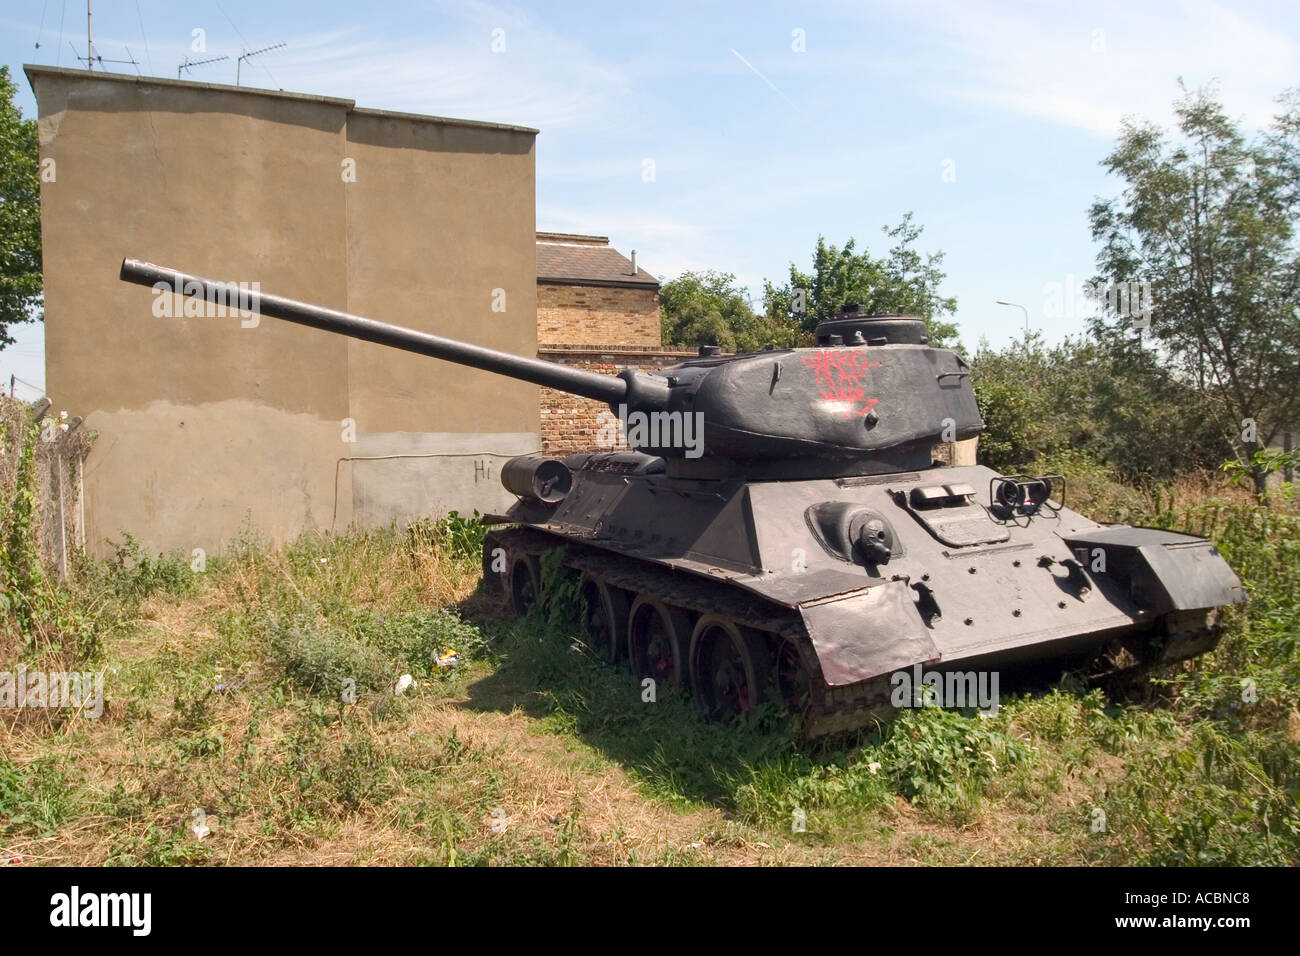 Privately owned Russian T 34 tank, known locally as Stompie. Pages Walk, Old Kent Road, London, England Stock Photo